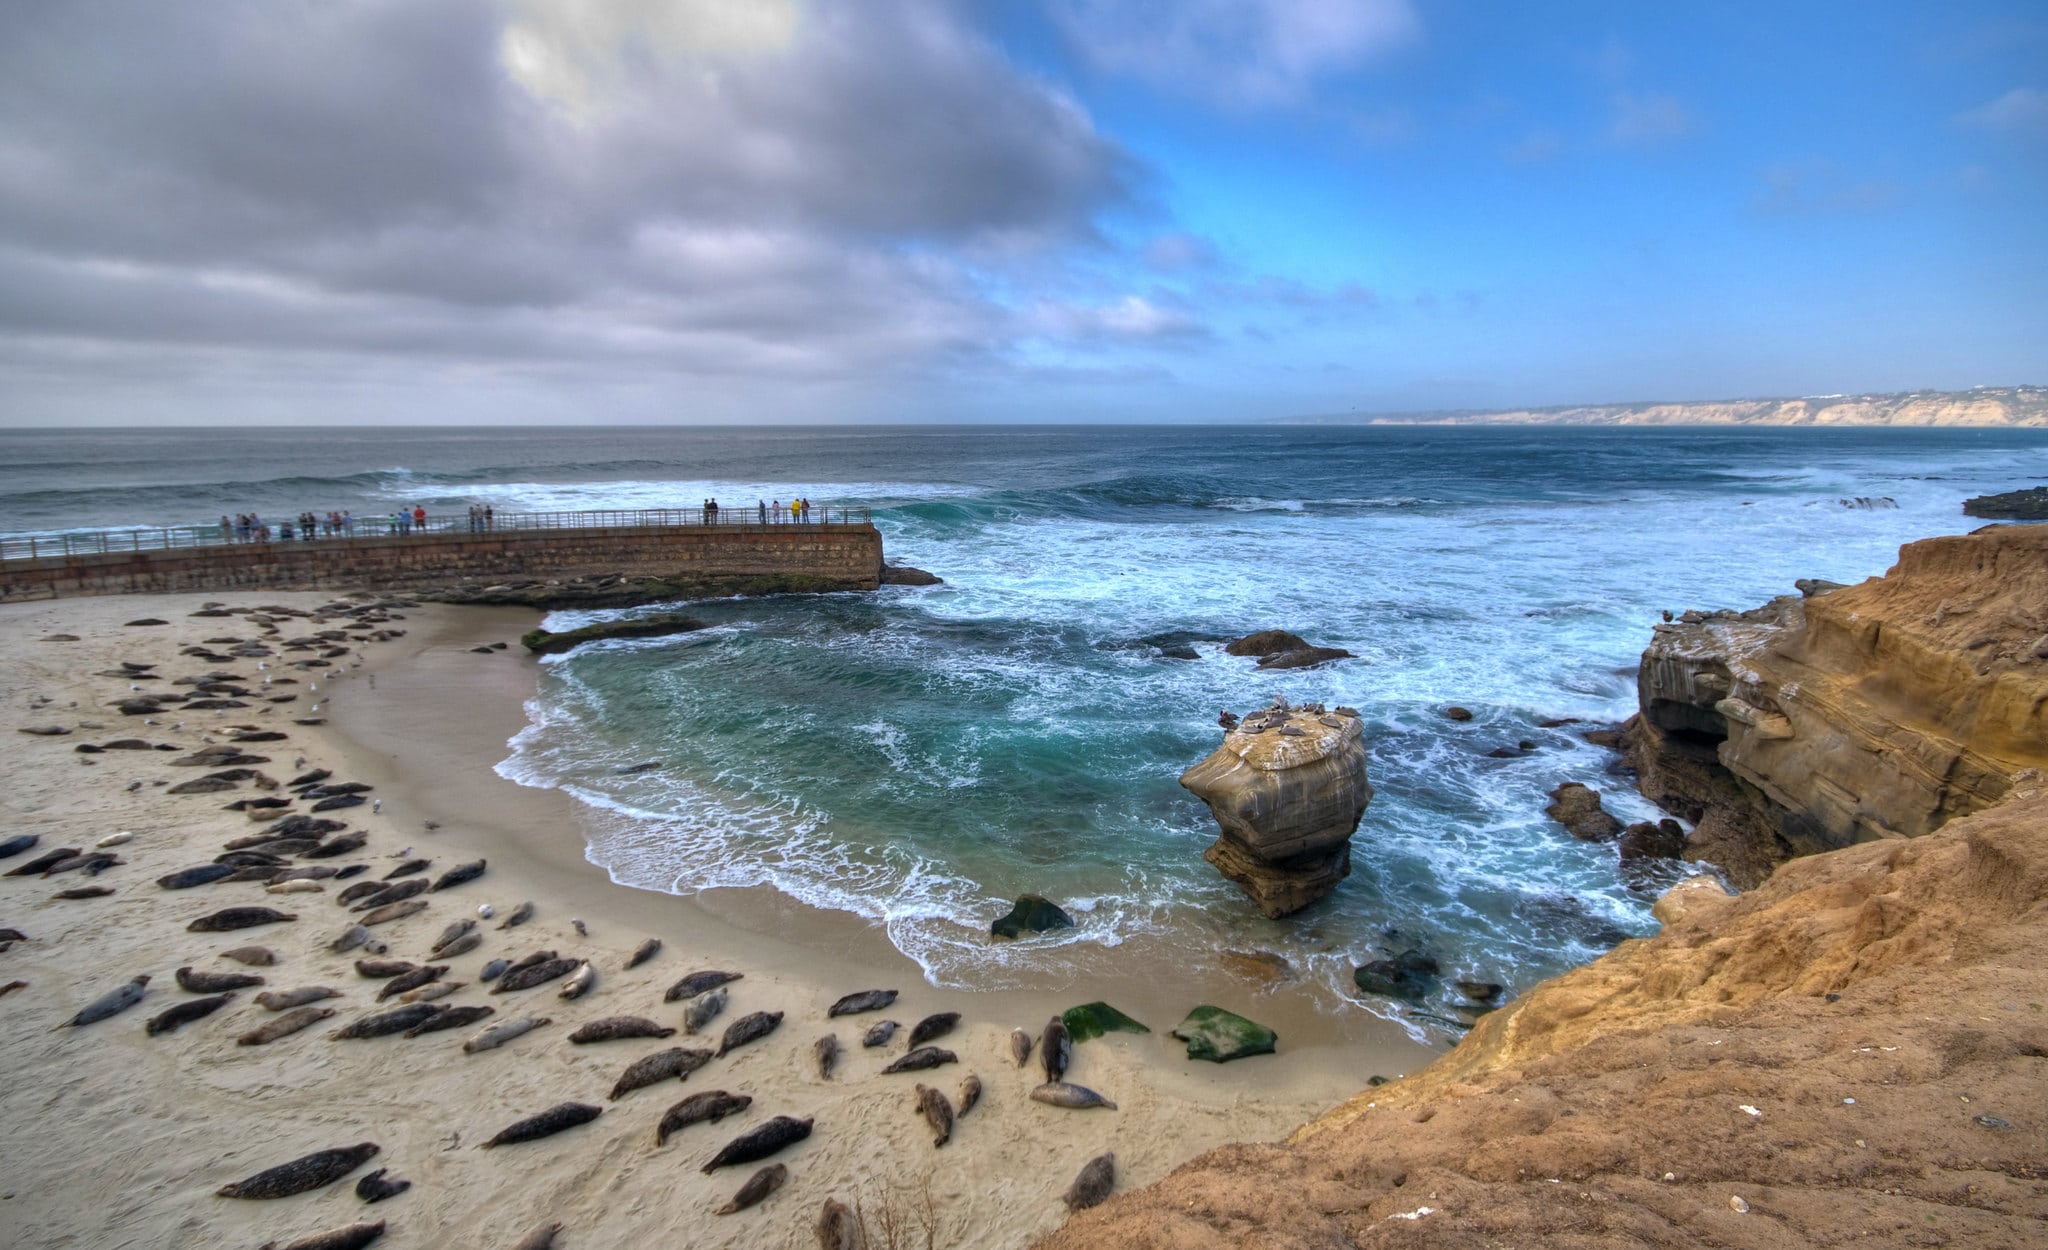 People and sea lions on a beach in La Jolla, California